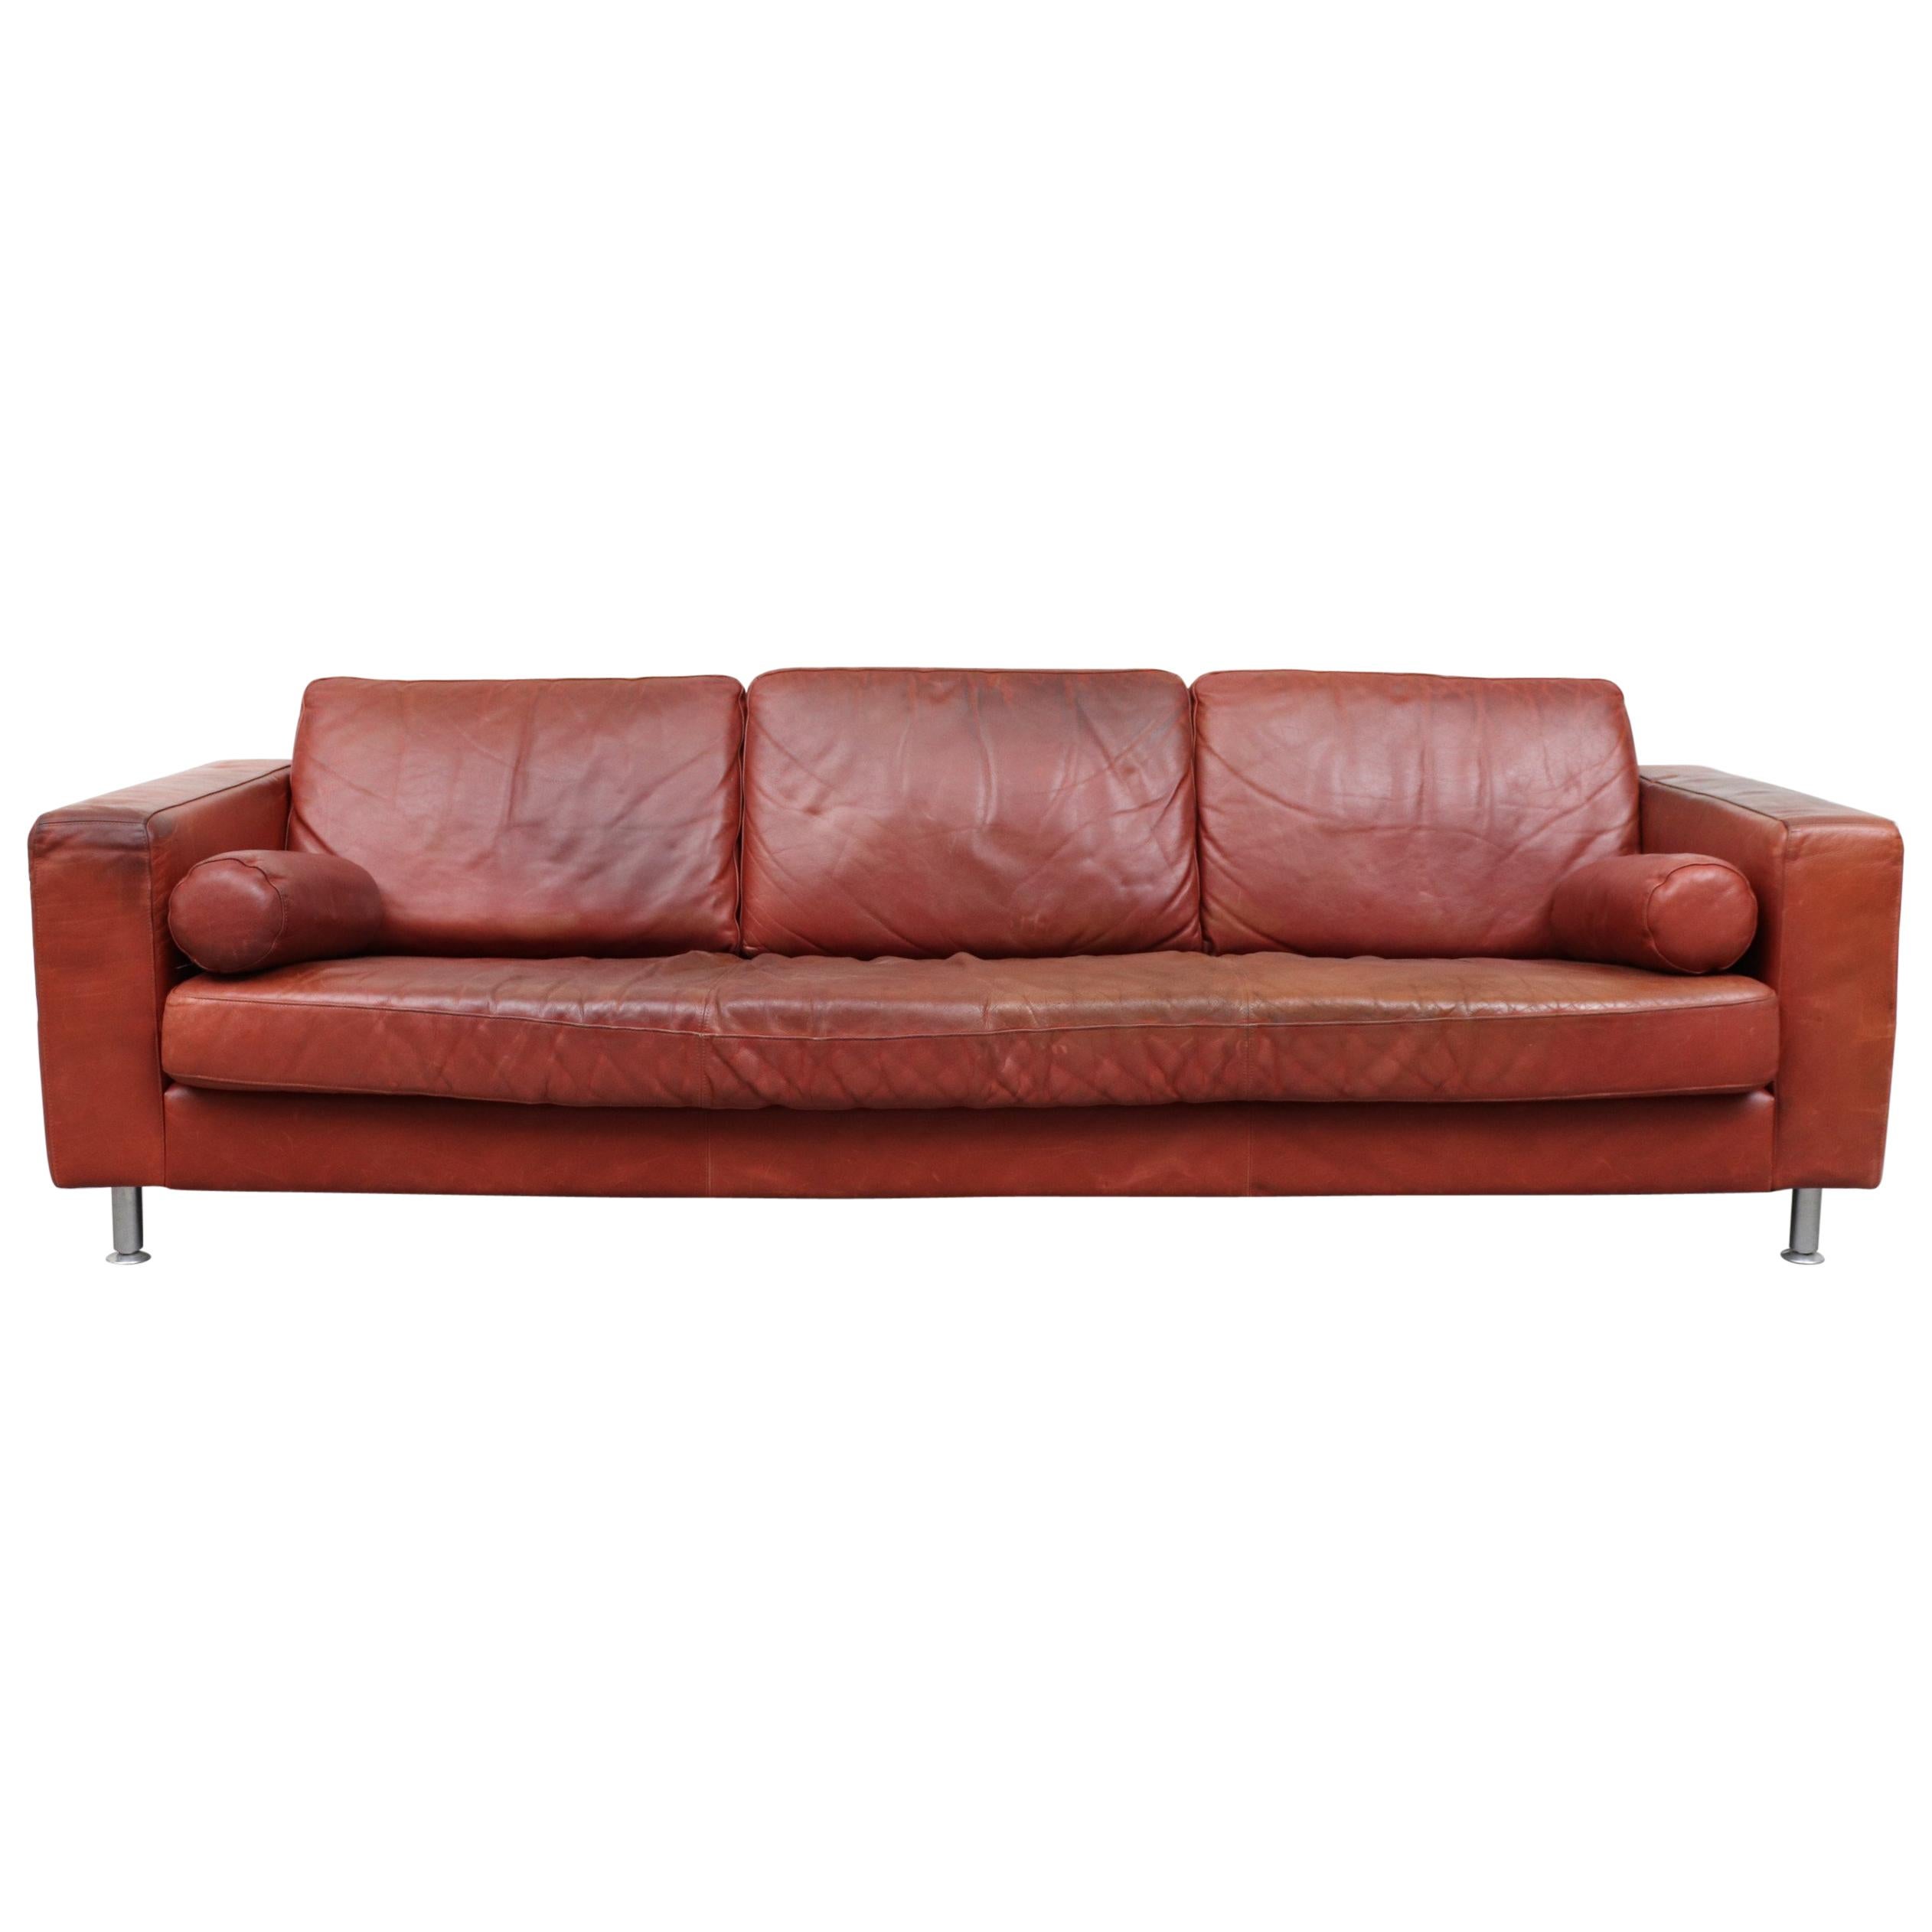 Handsome Extra Long Knoll Style Leather Sofa